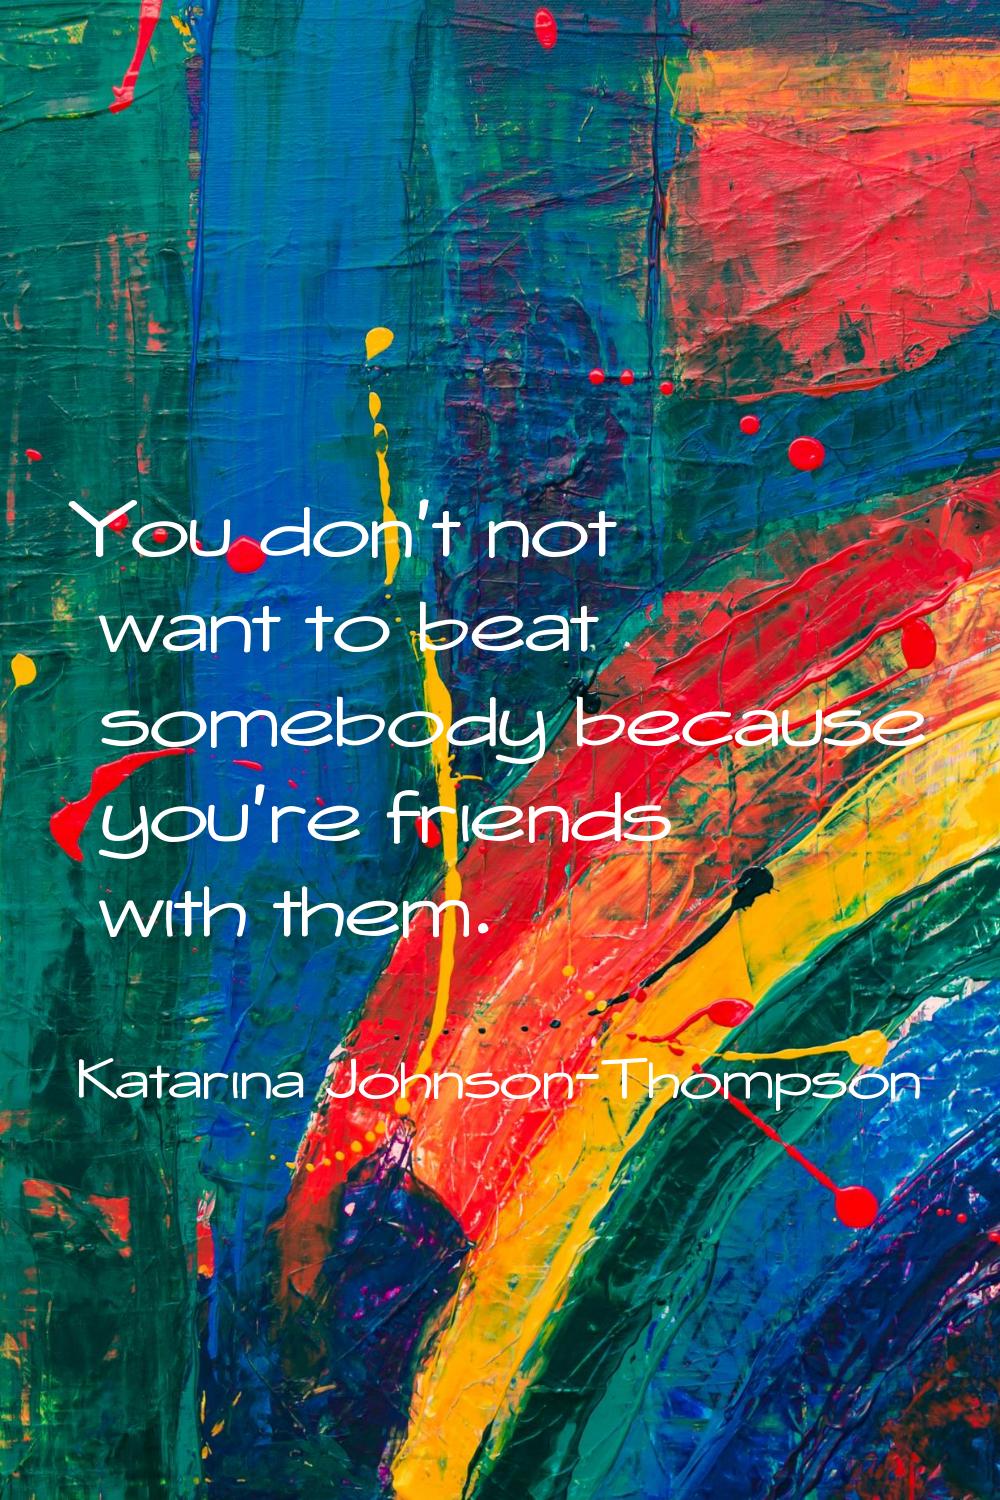 You don't not want to beat somebody because you're friends with them.